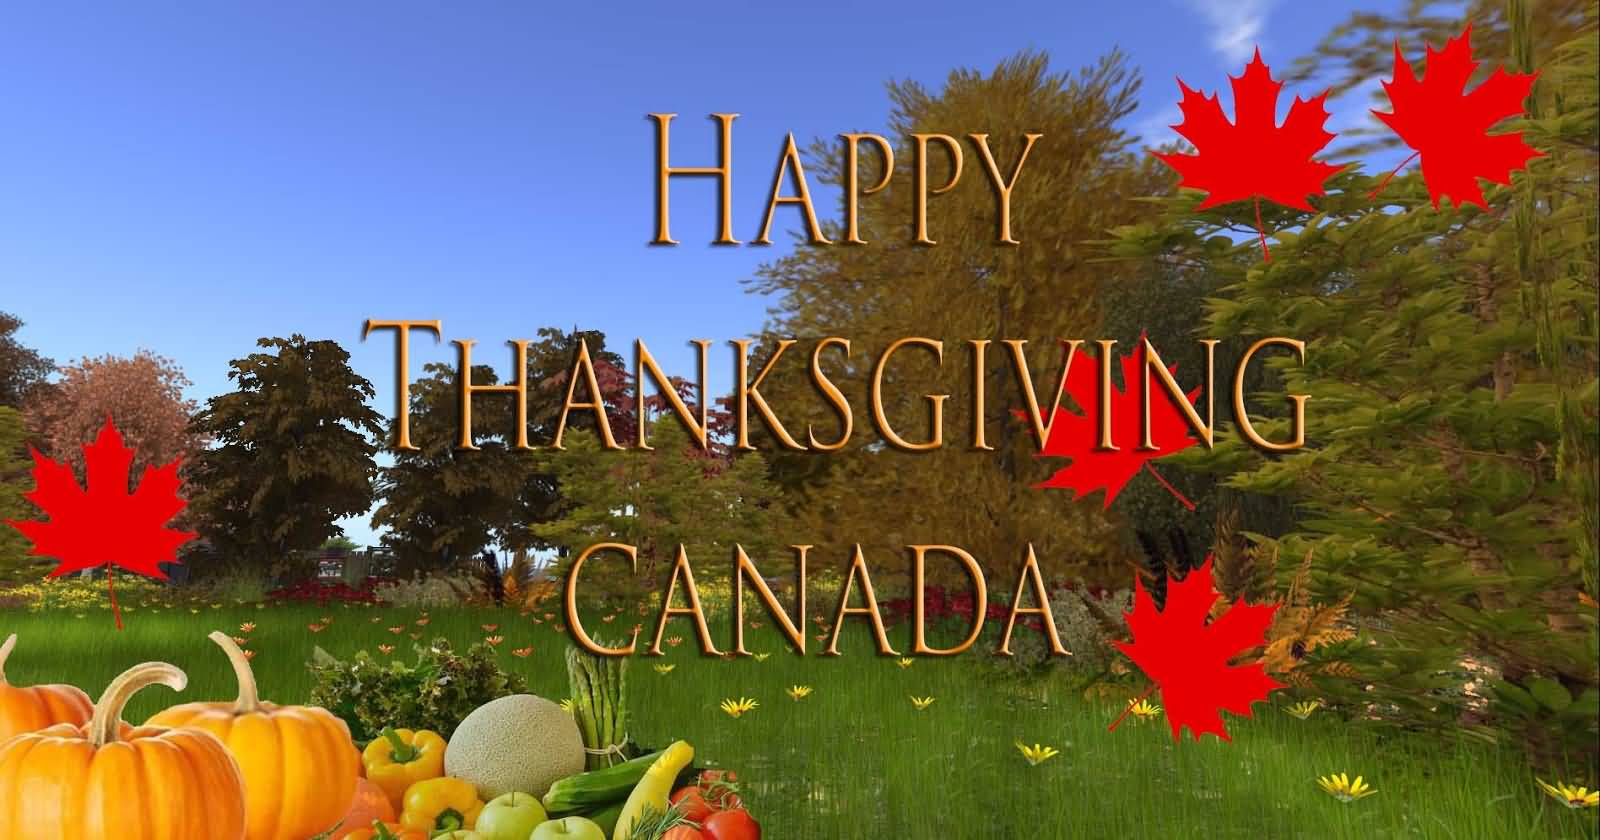 The 30 Best Ideas for Canadian Thanksgiving Quotes Home, Family